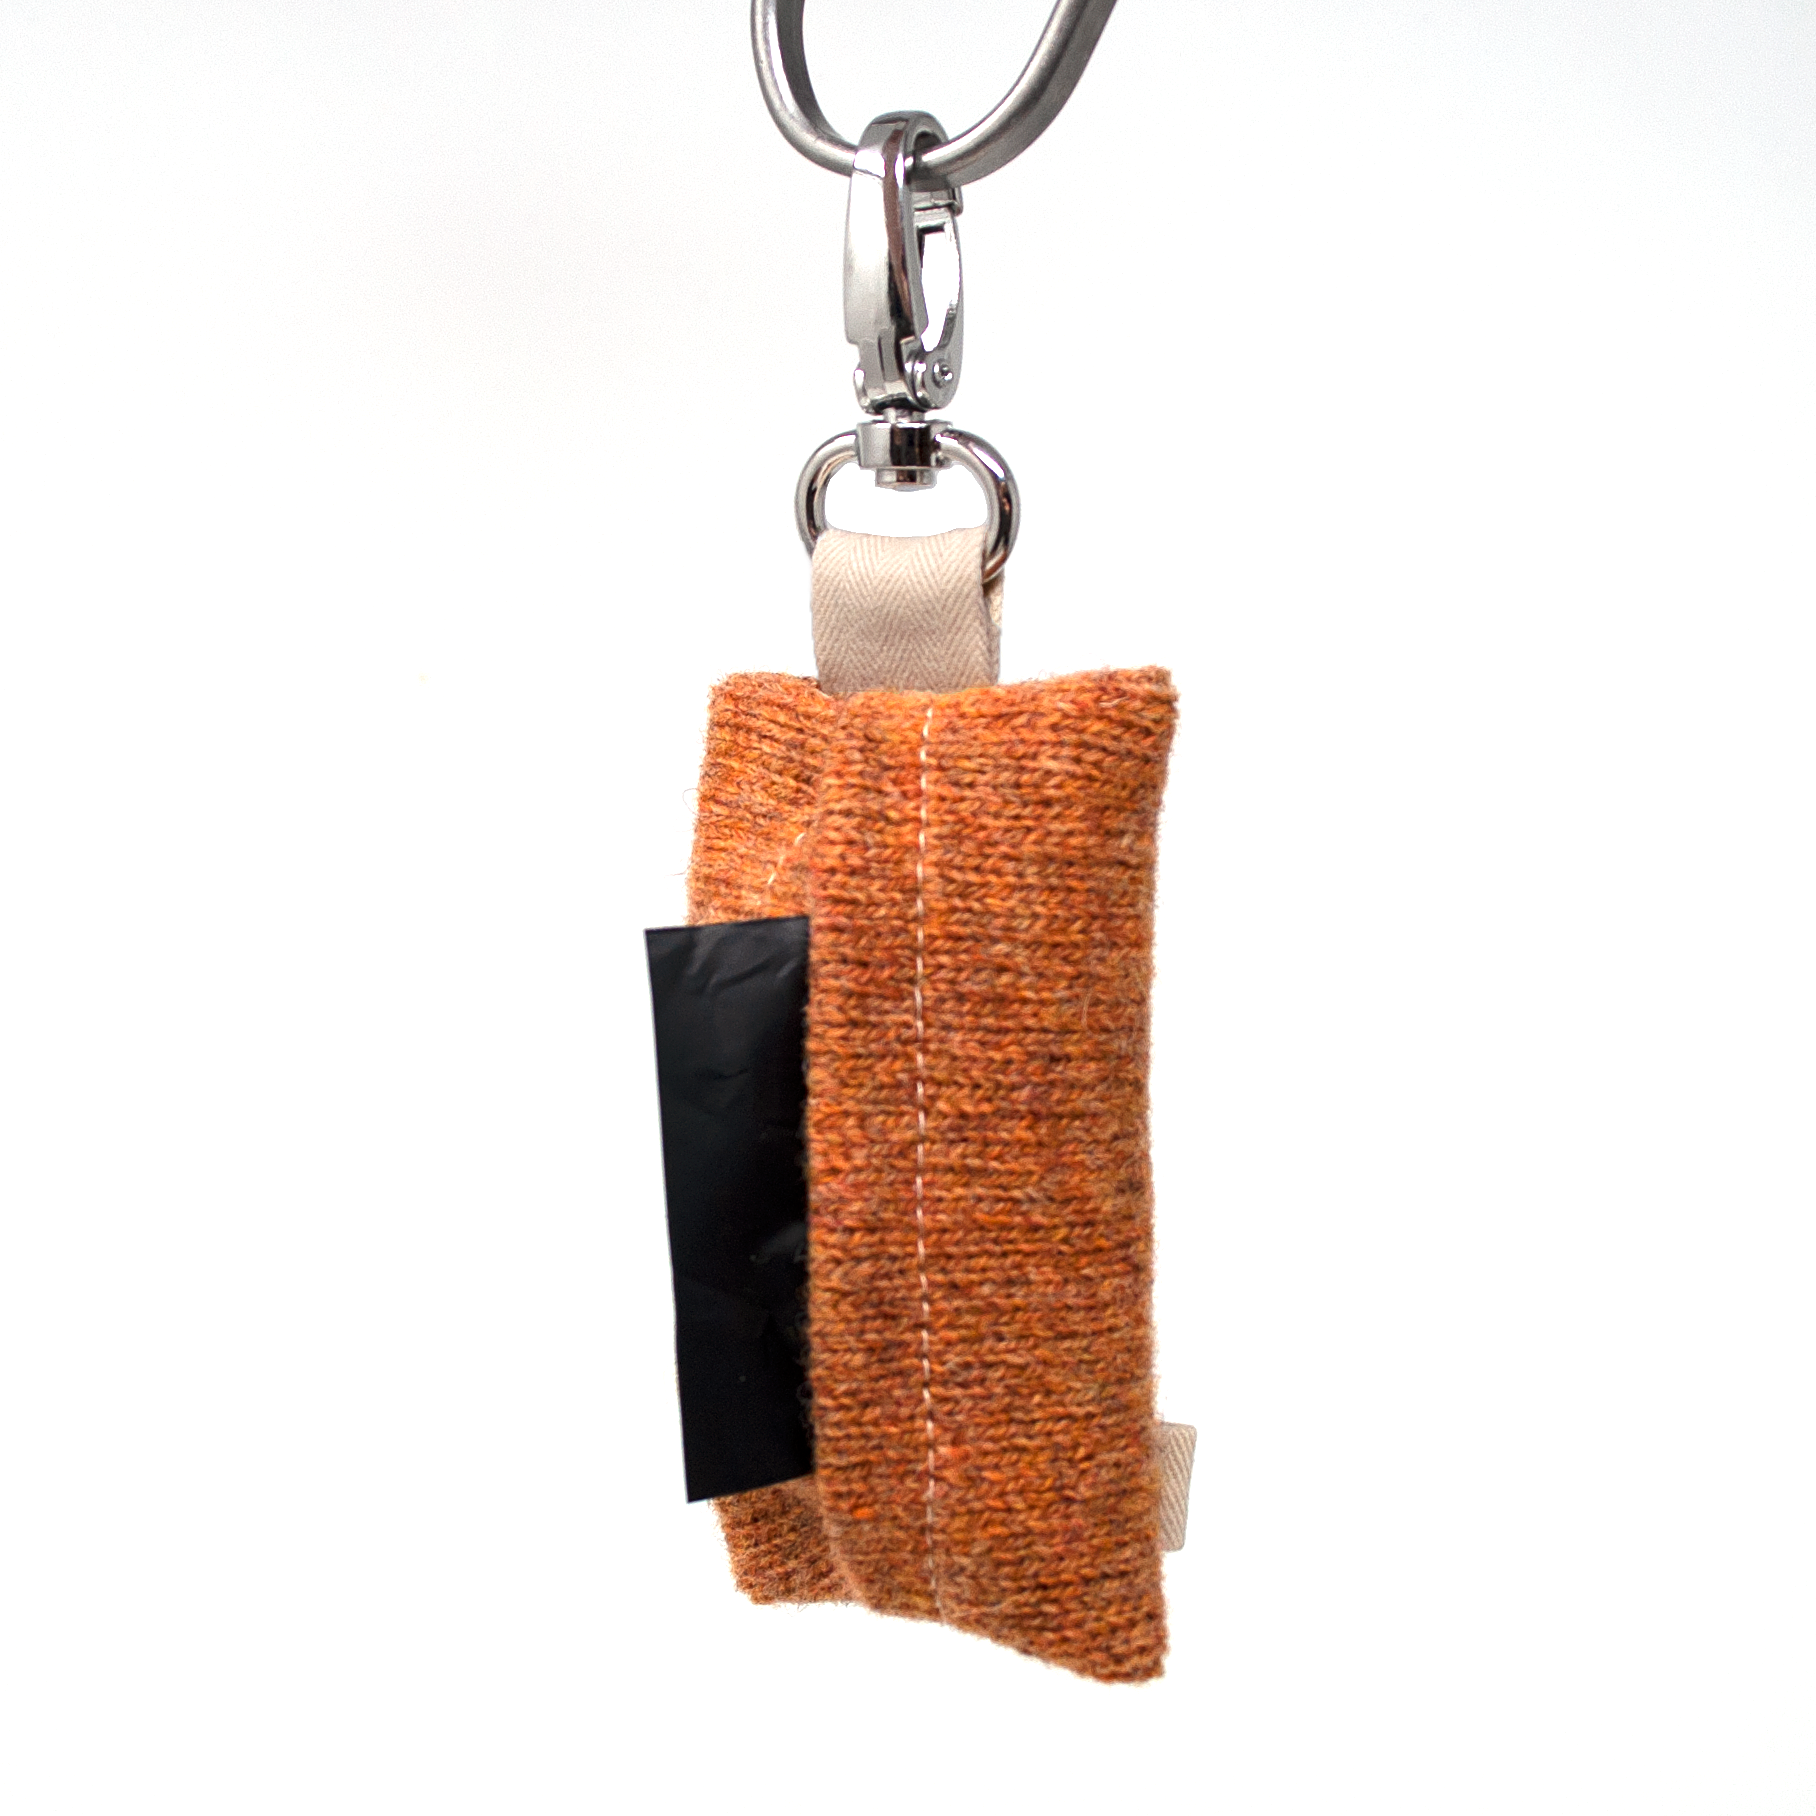 Copper - Autumn/Winter '23 Collection - Luxury Poo Bag Holder